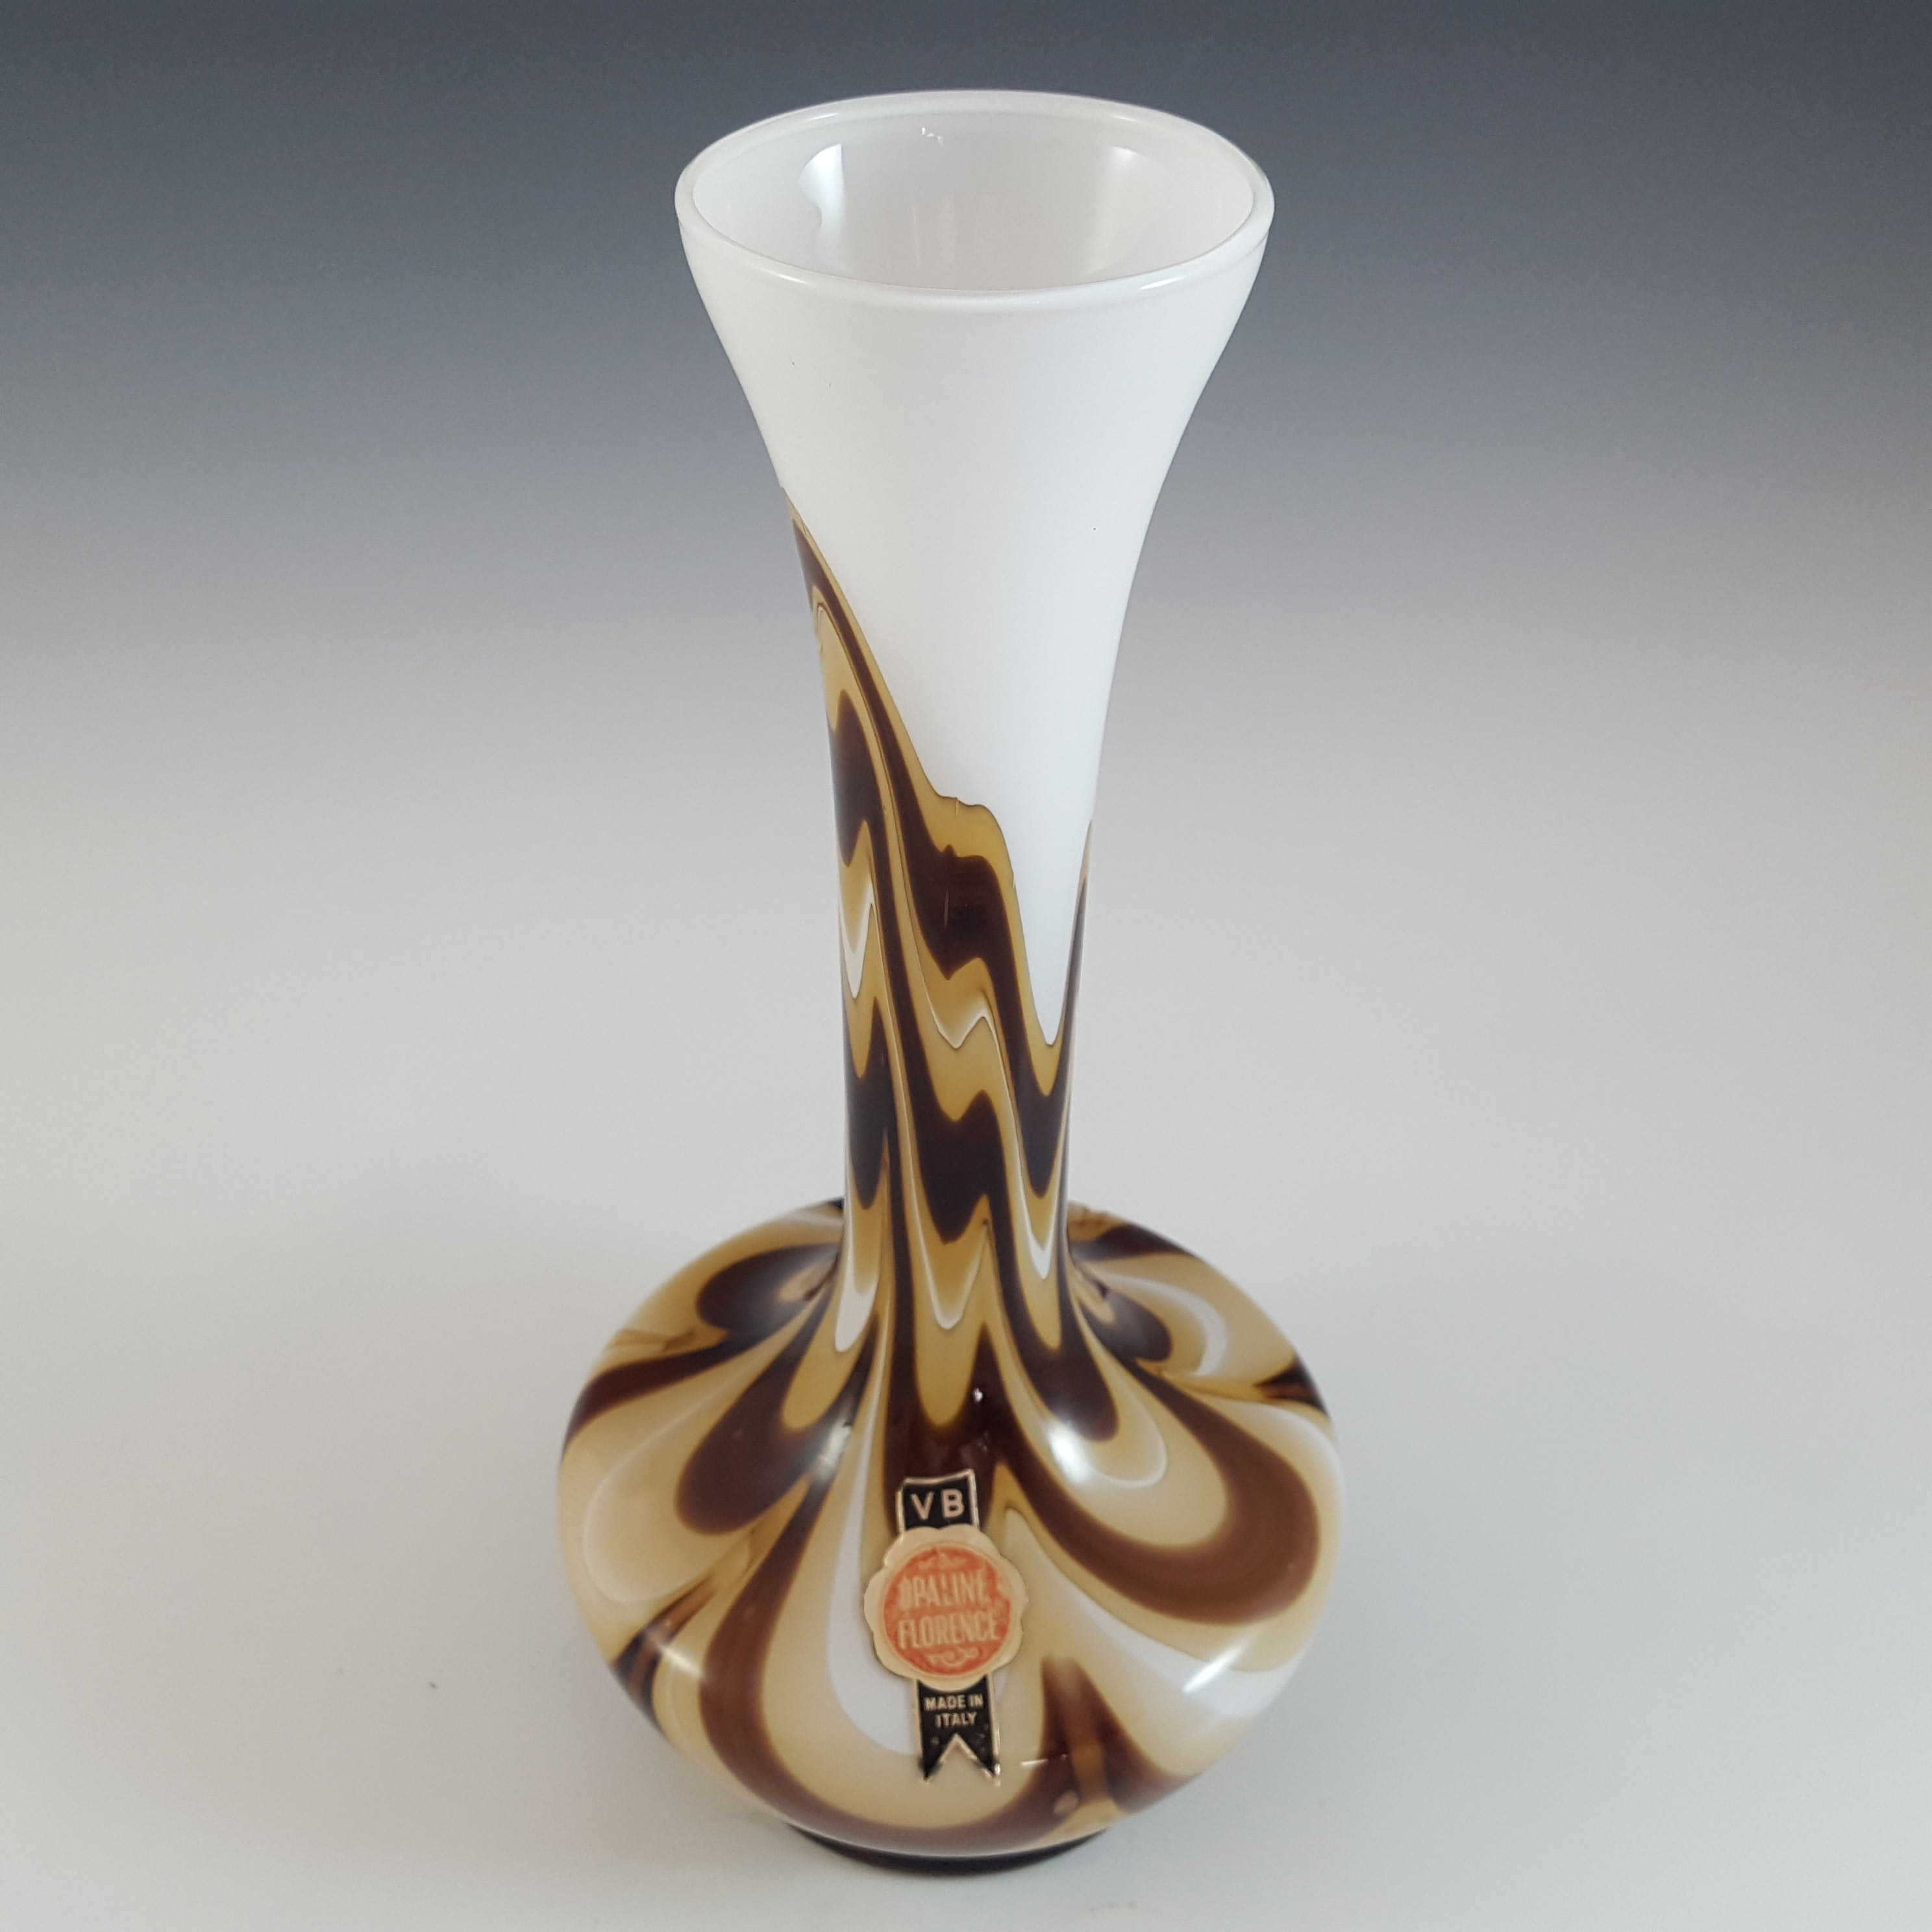 LABELLED V.B. Opaline Florence Empoli White & Brown Glass Vase - Click Image to Close